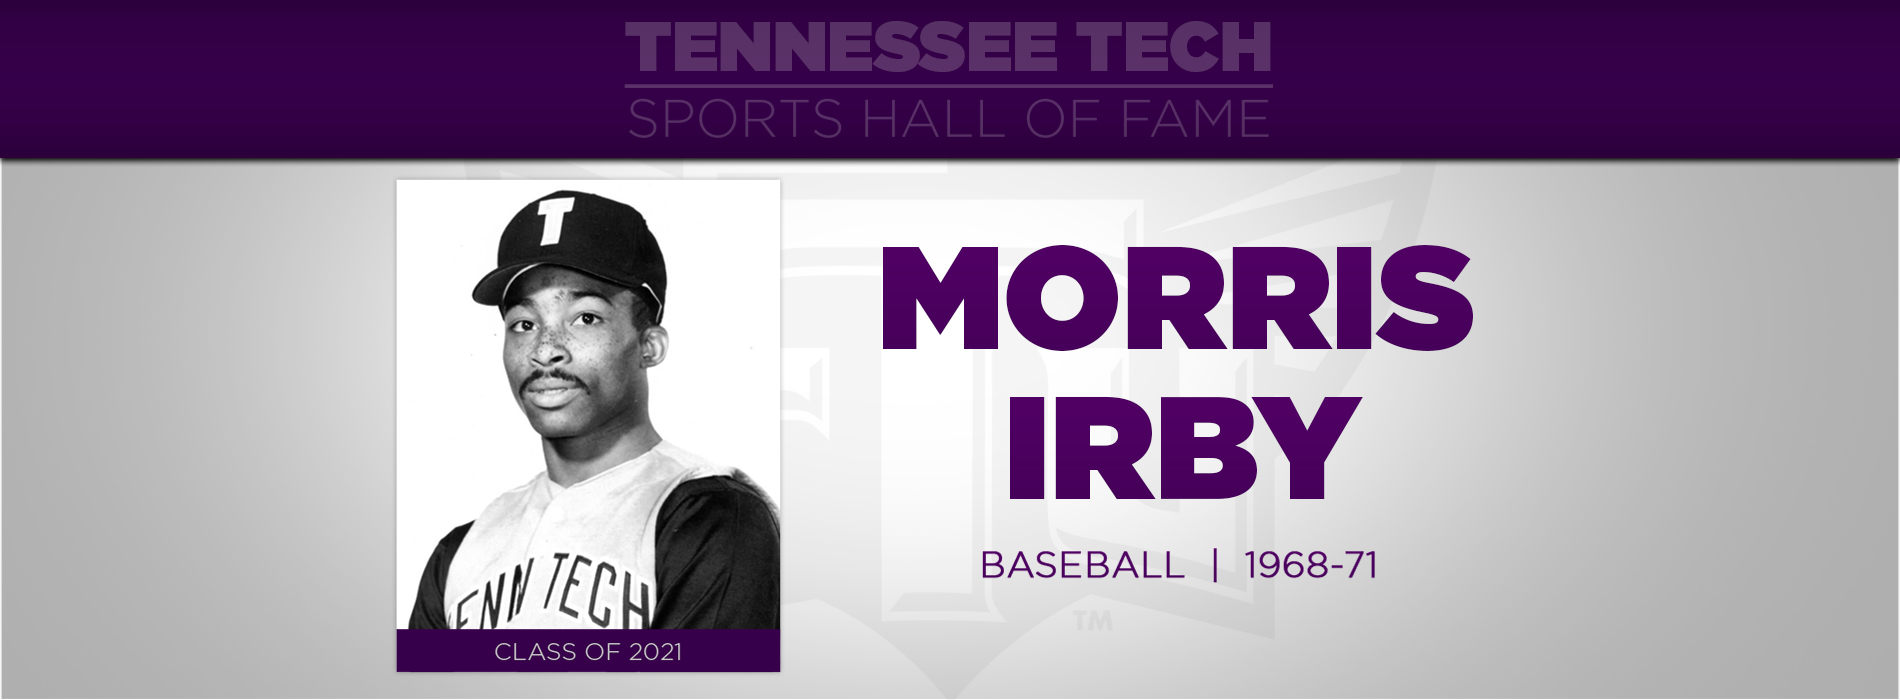 Irby to be inducted into TTU Sports Hall of Fame Friday night